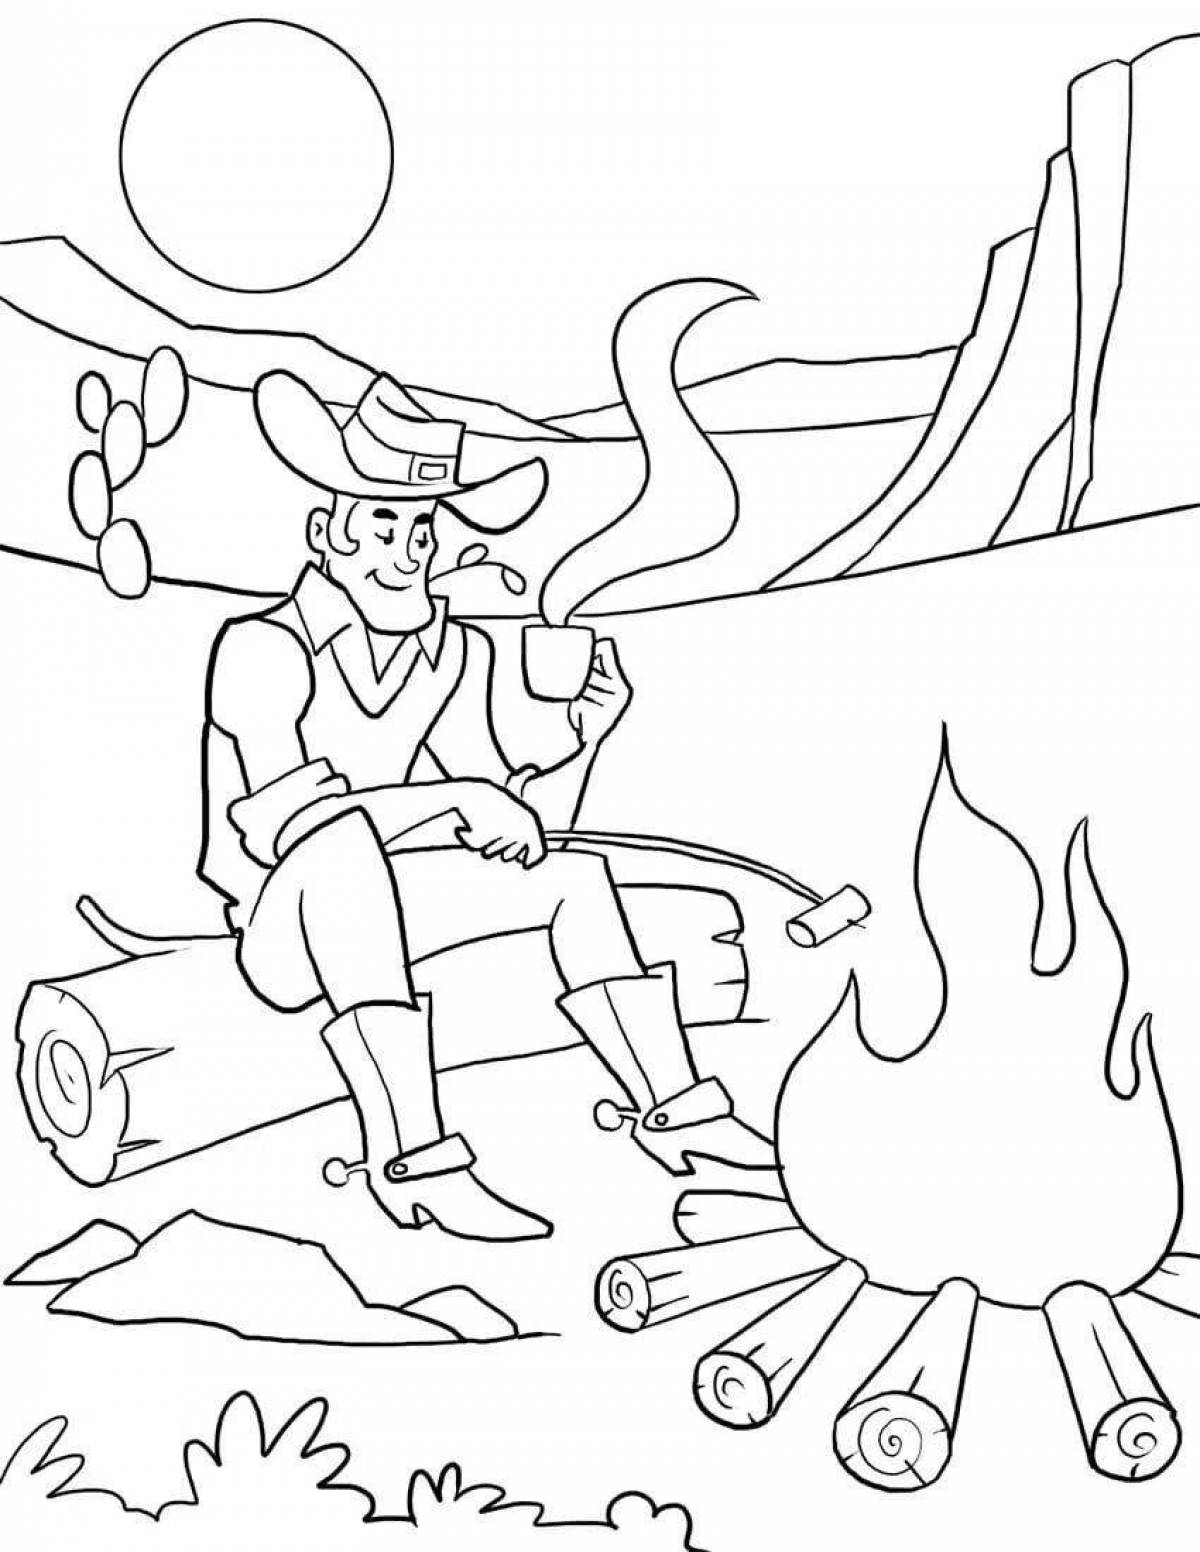 Flint's playful coloring page